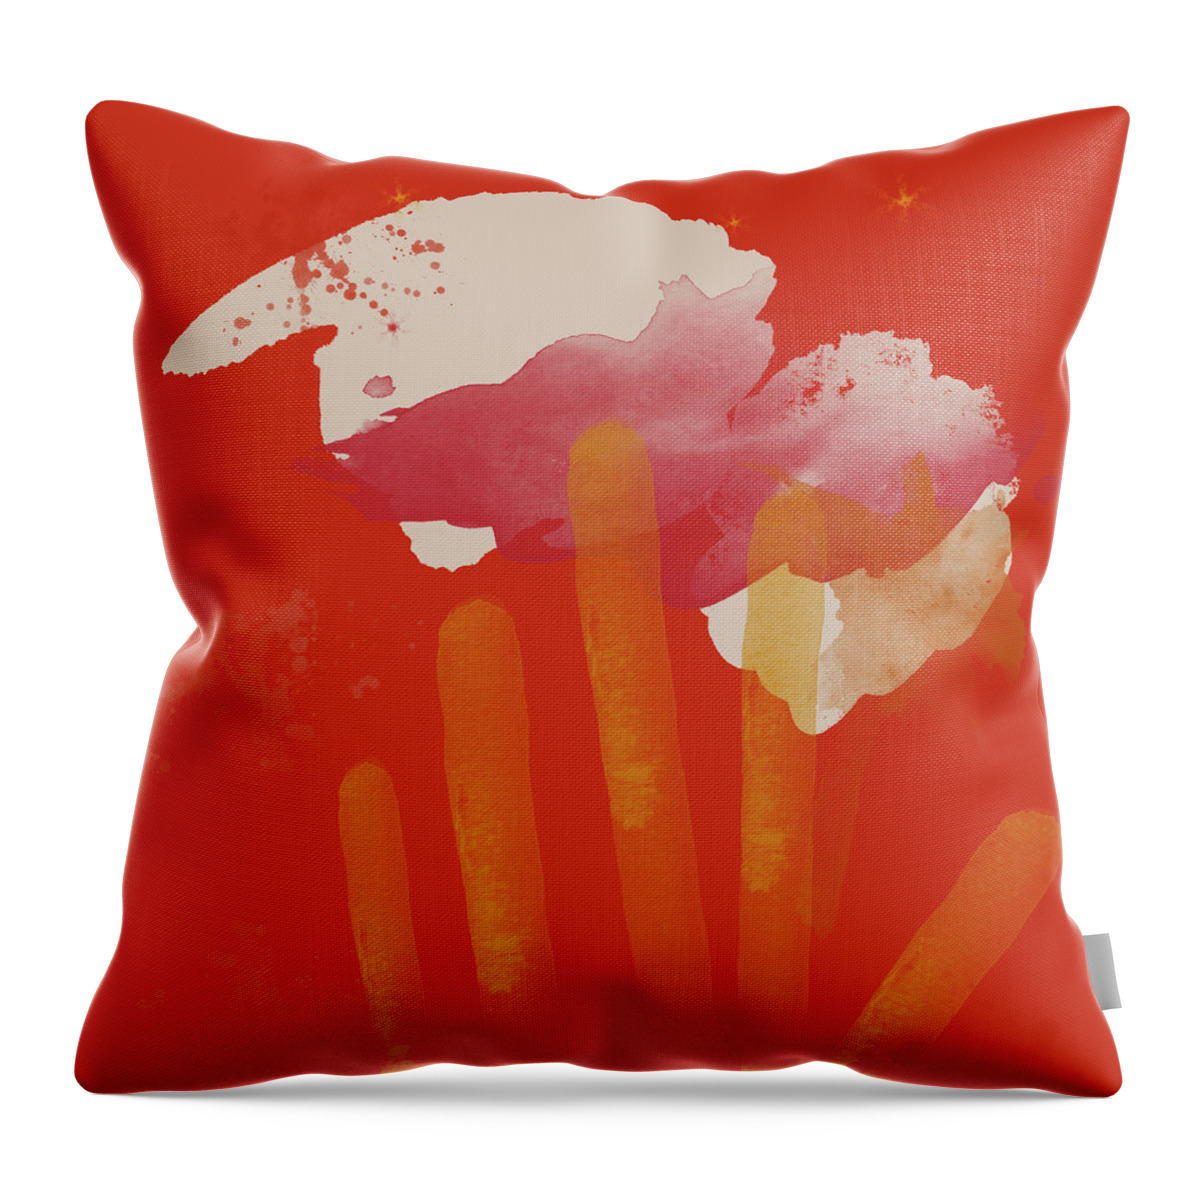  Reach For Your Dreams Throw Pillow featuring the painting Reach for Your Dreams #1 by Kandy Hurley